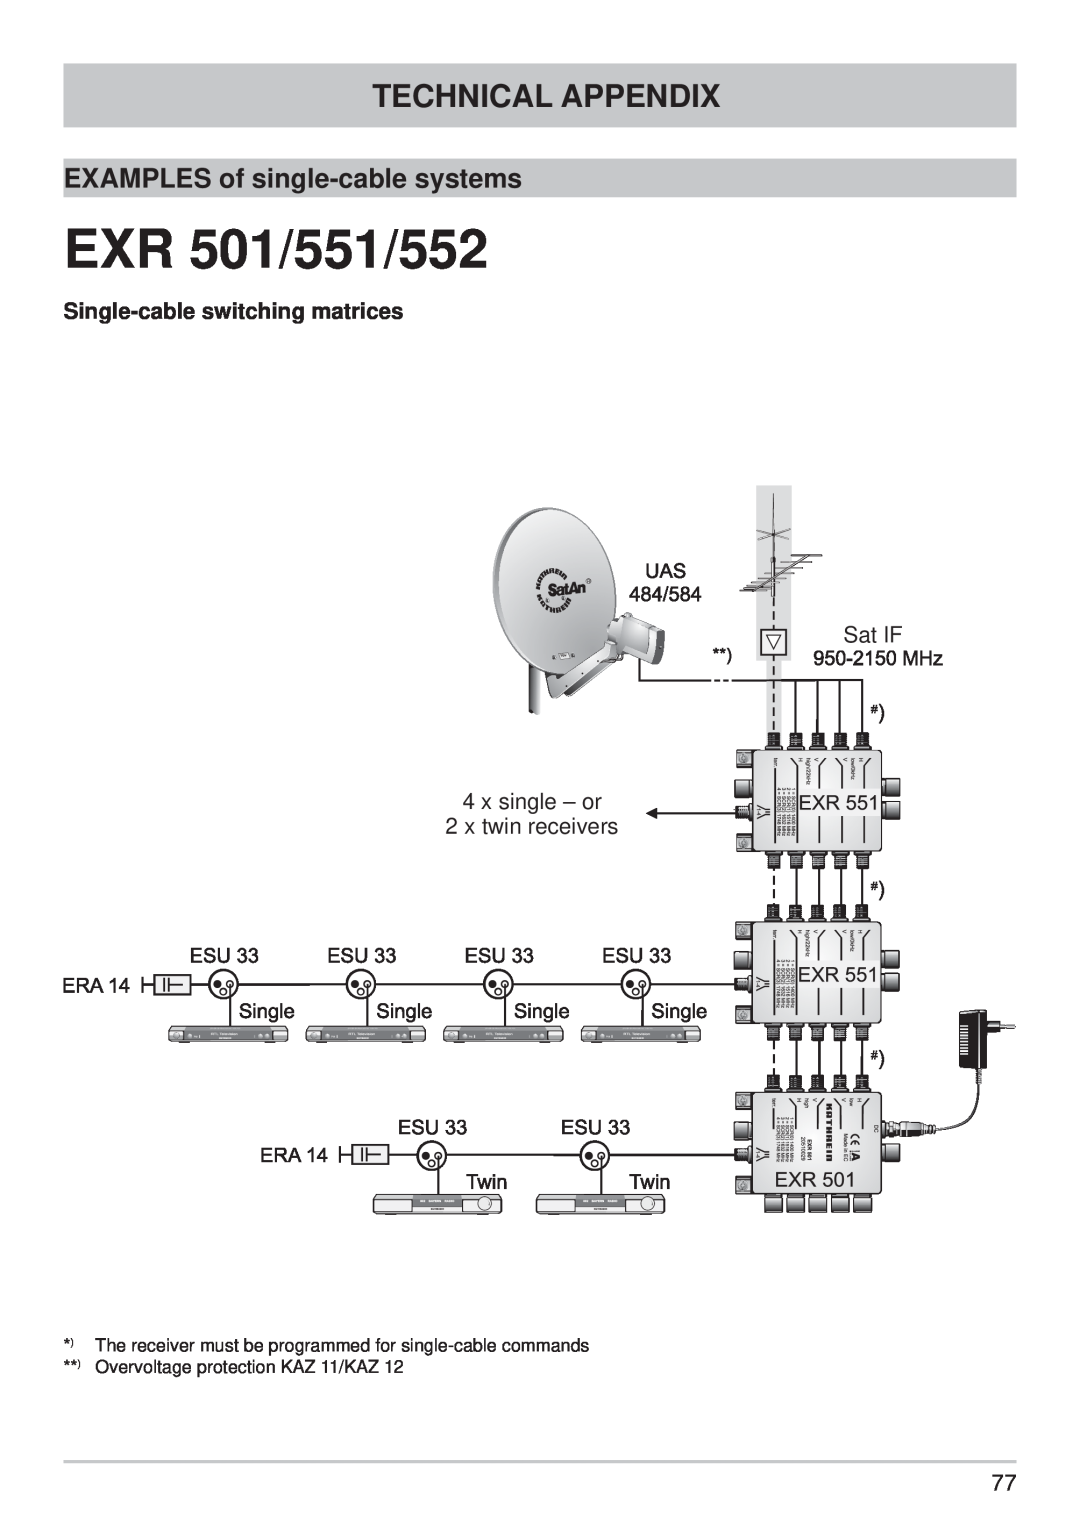 Kathrein UFS 790si EXR 501/551/552, EXAMPLES of single-cable systems, Single-cable switching matrices, Technical Appendix 